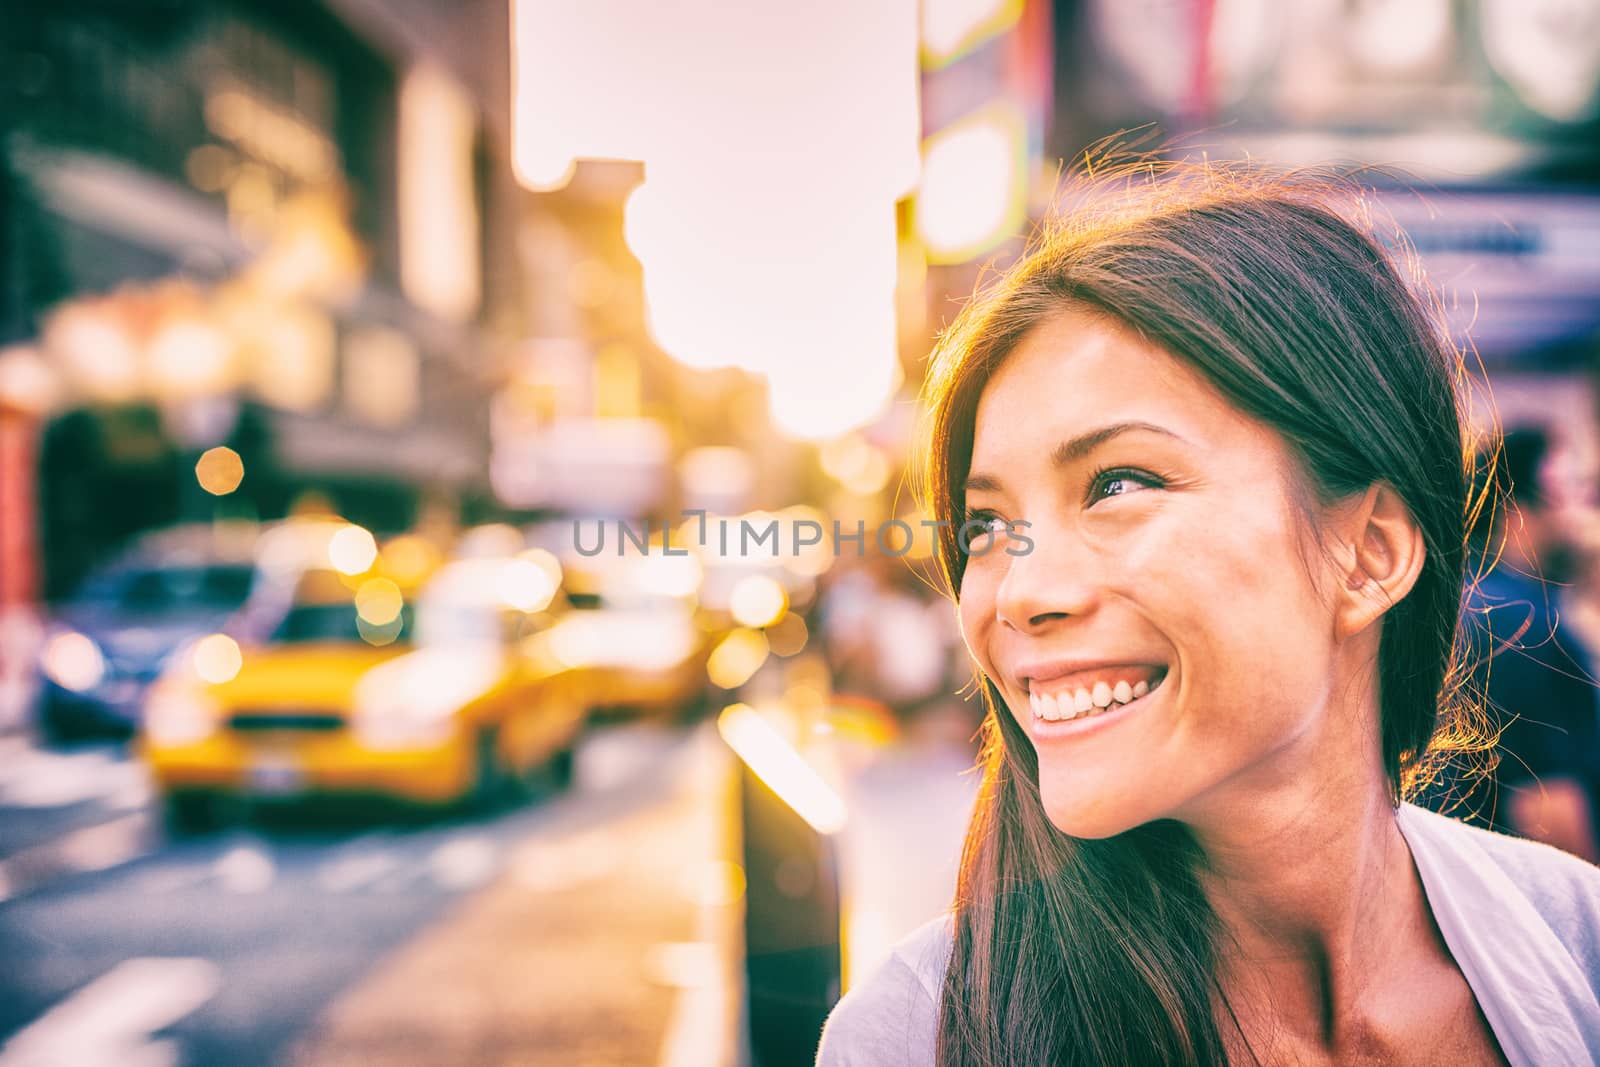 Happy people New York city lifestyle young Asian woman smiling in sunset walking in street with taxi cabs traffic sun shining down in downtown Manhattan, New York City by Maridav